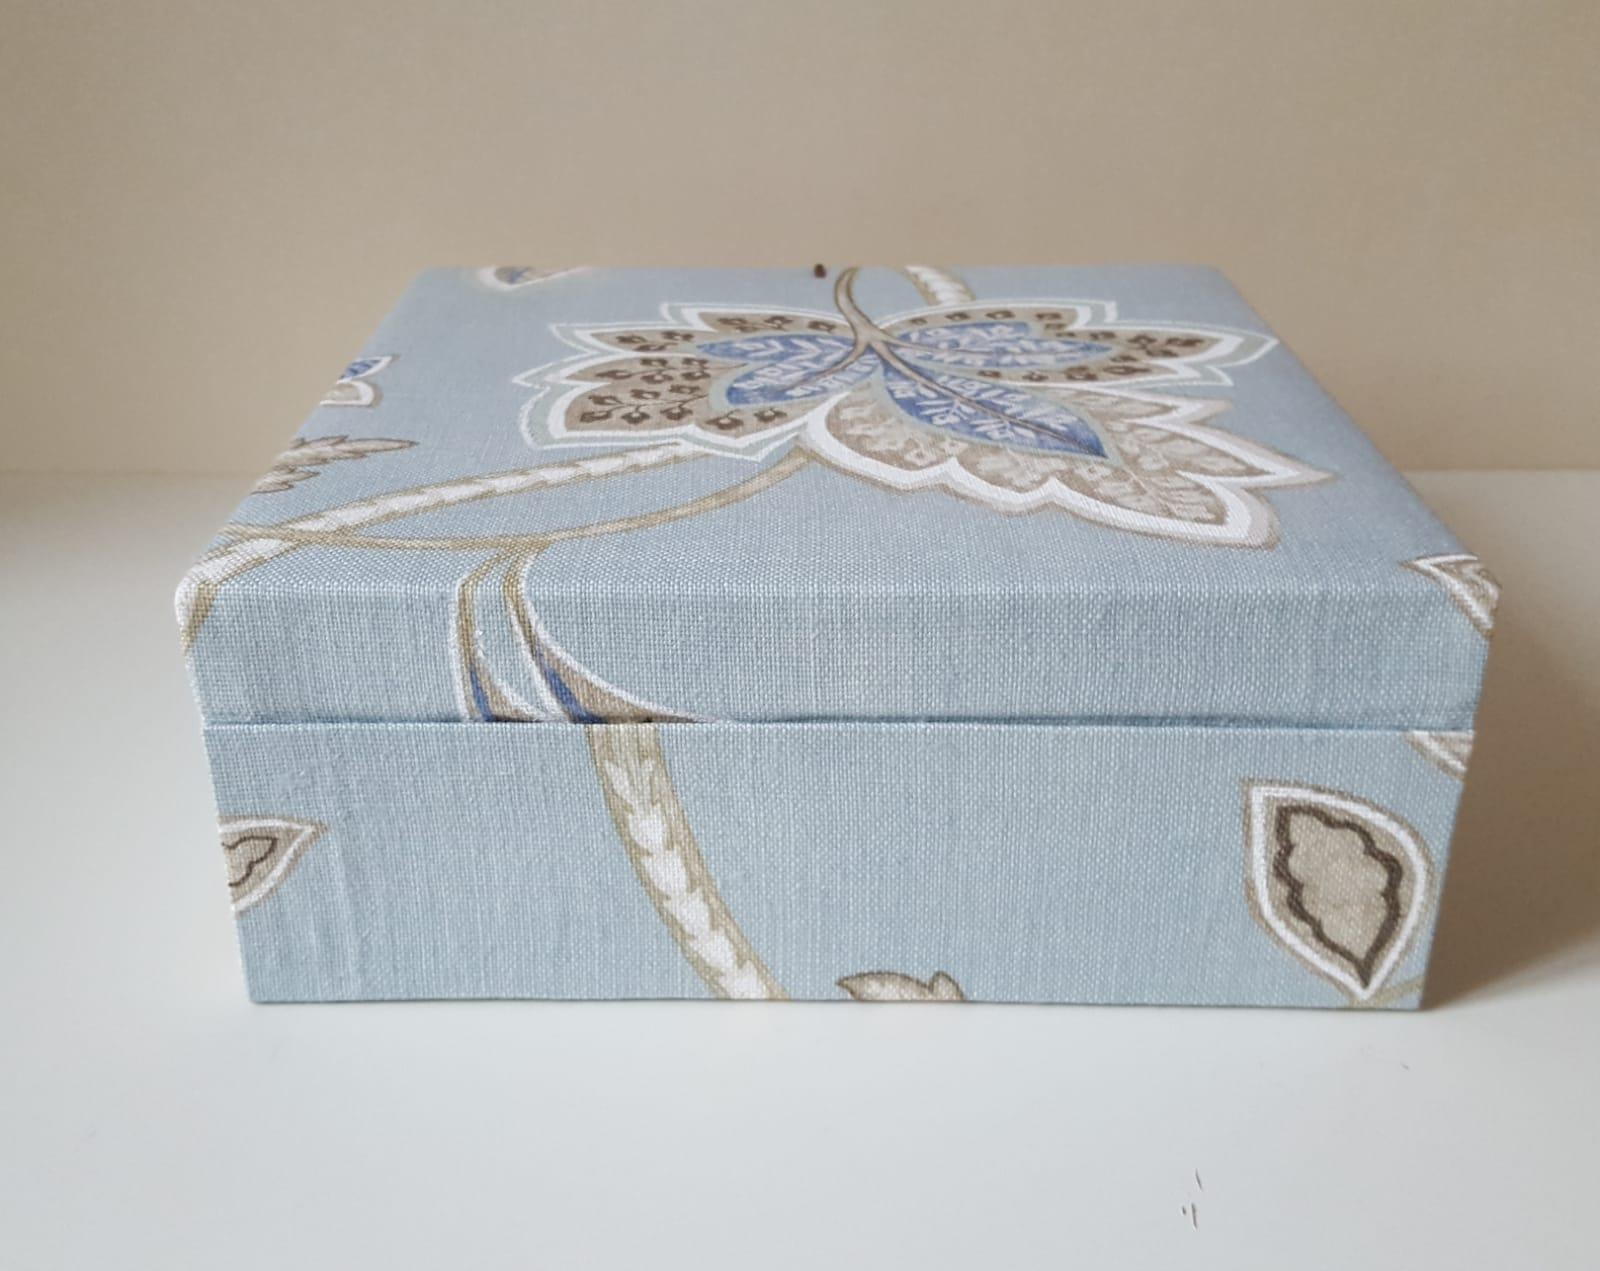 Leaves Pattern Fabric Decorative Storage Box for Scarves  5